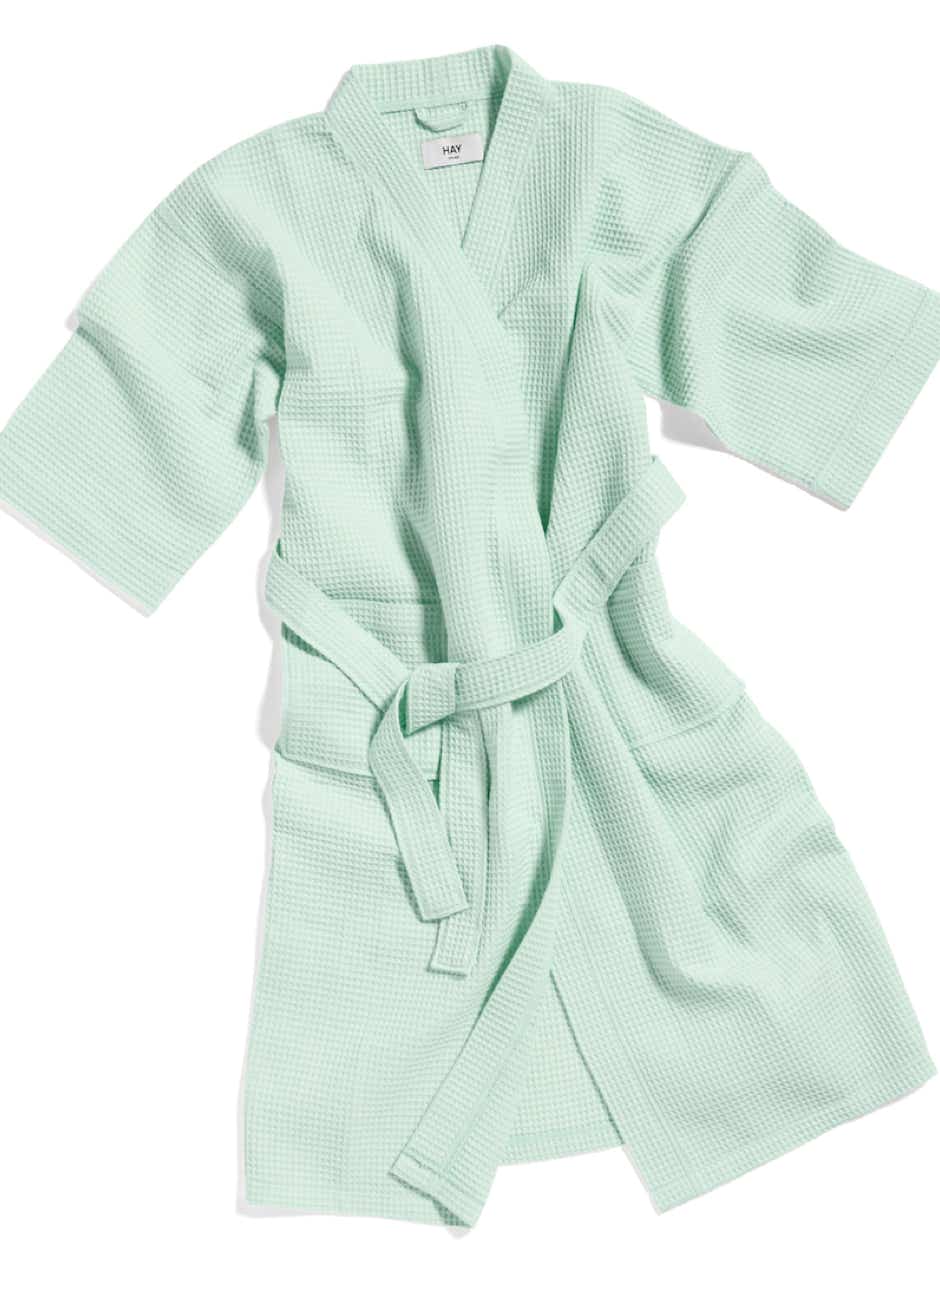 Waffle collection  Embossed cotton bathrobes and towels